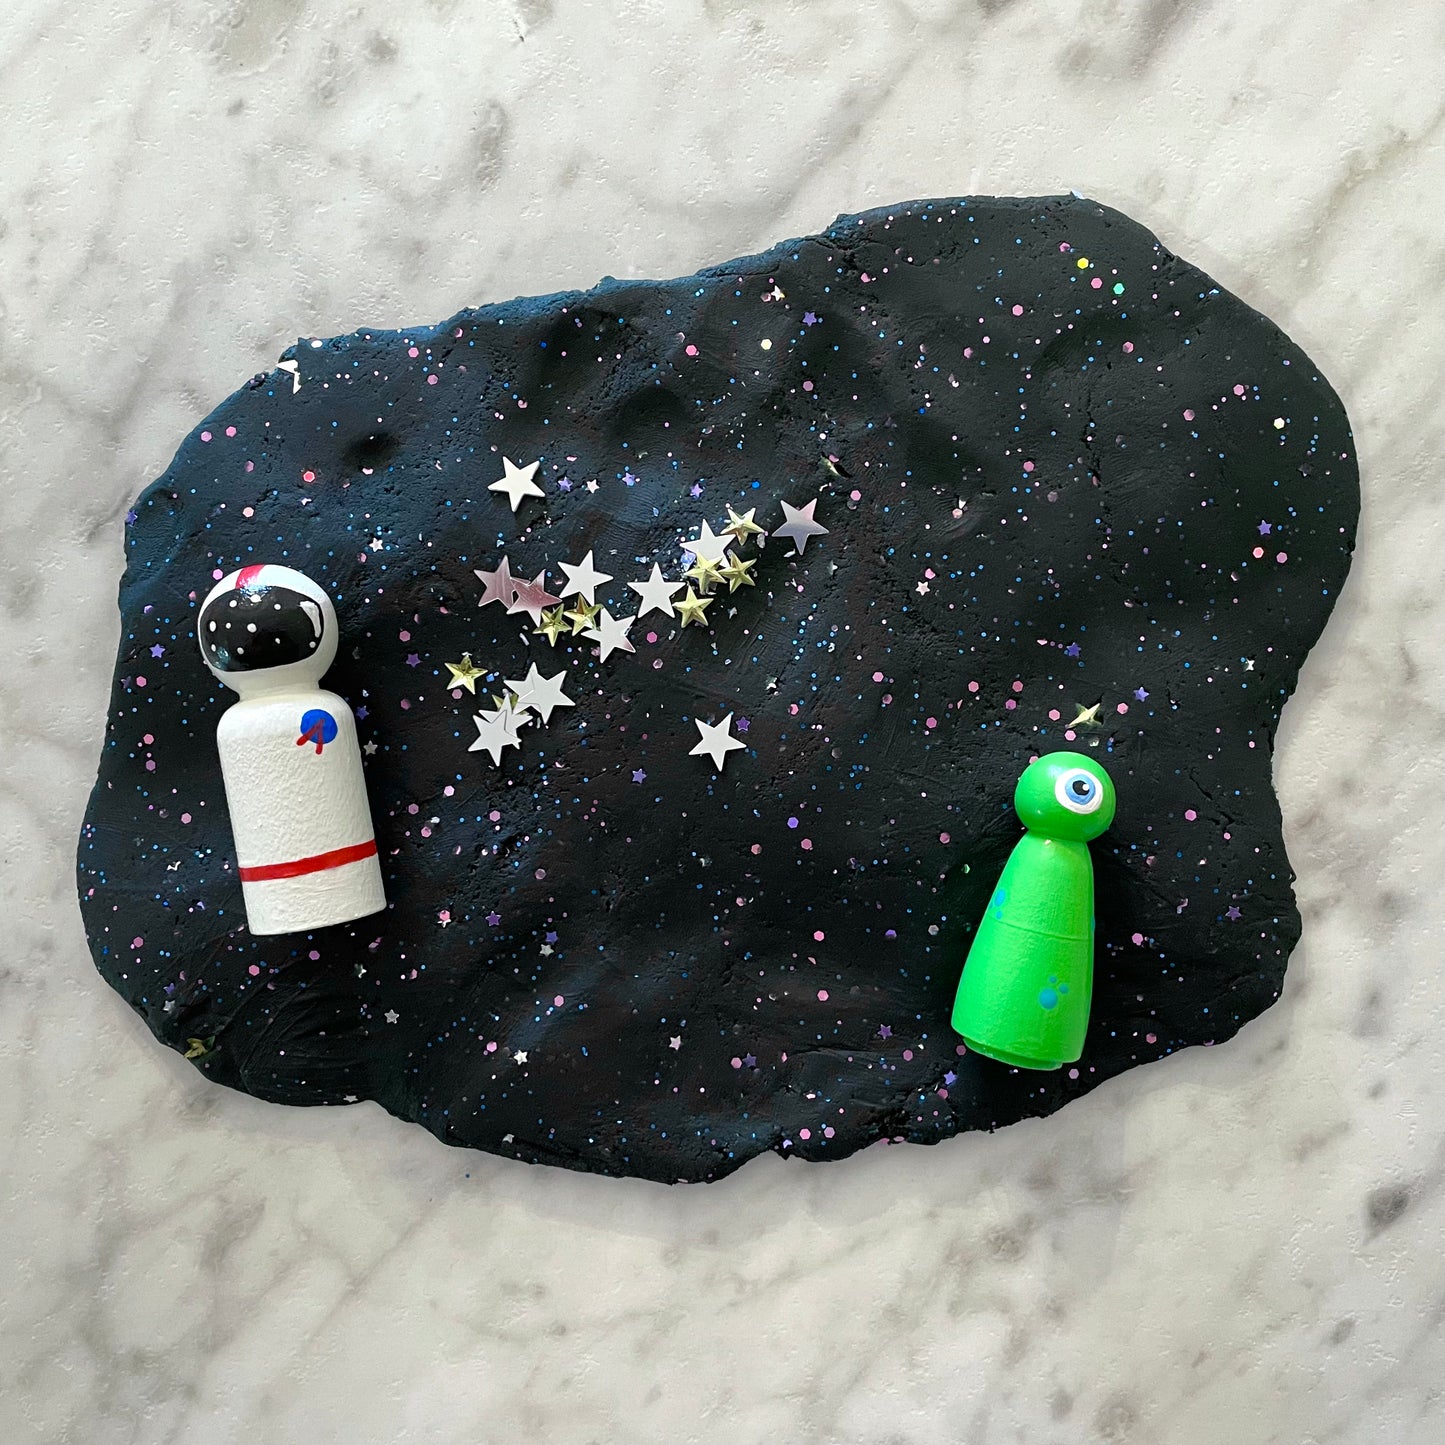 Handmade Play Dough - Out of this World